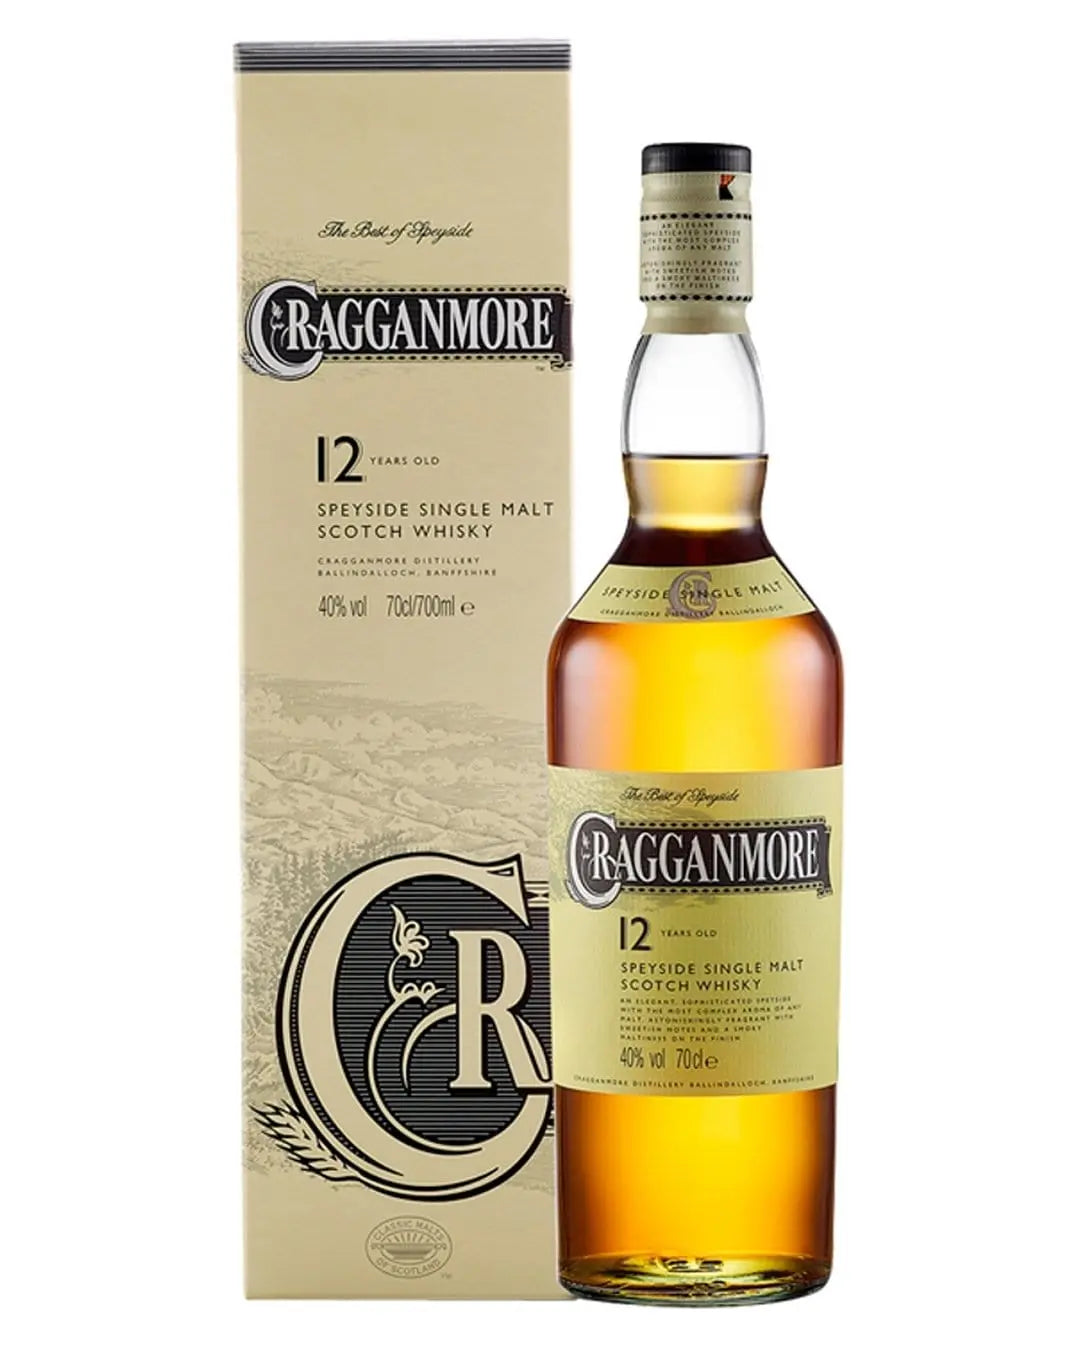 Cragganmore 12 Year Old Whisky, 70 cl Whisky 5000281005430